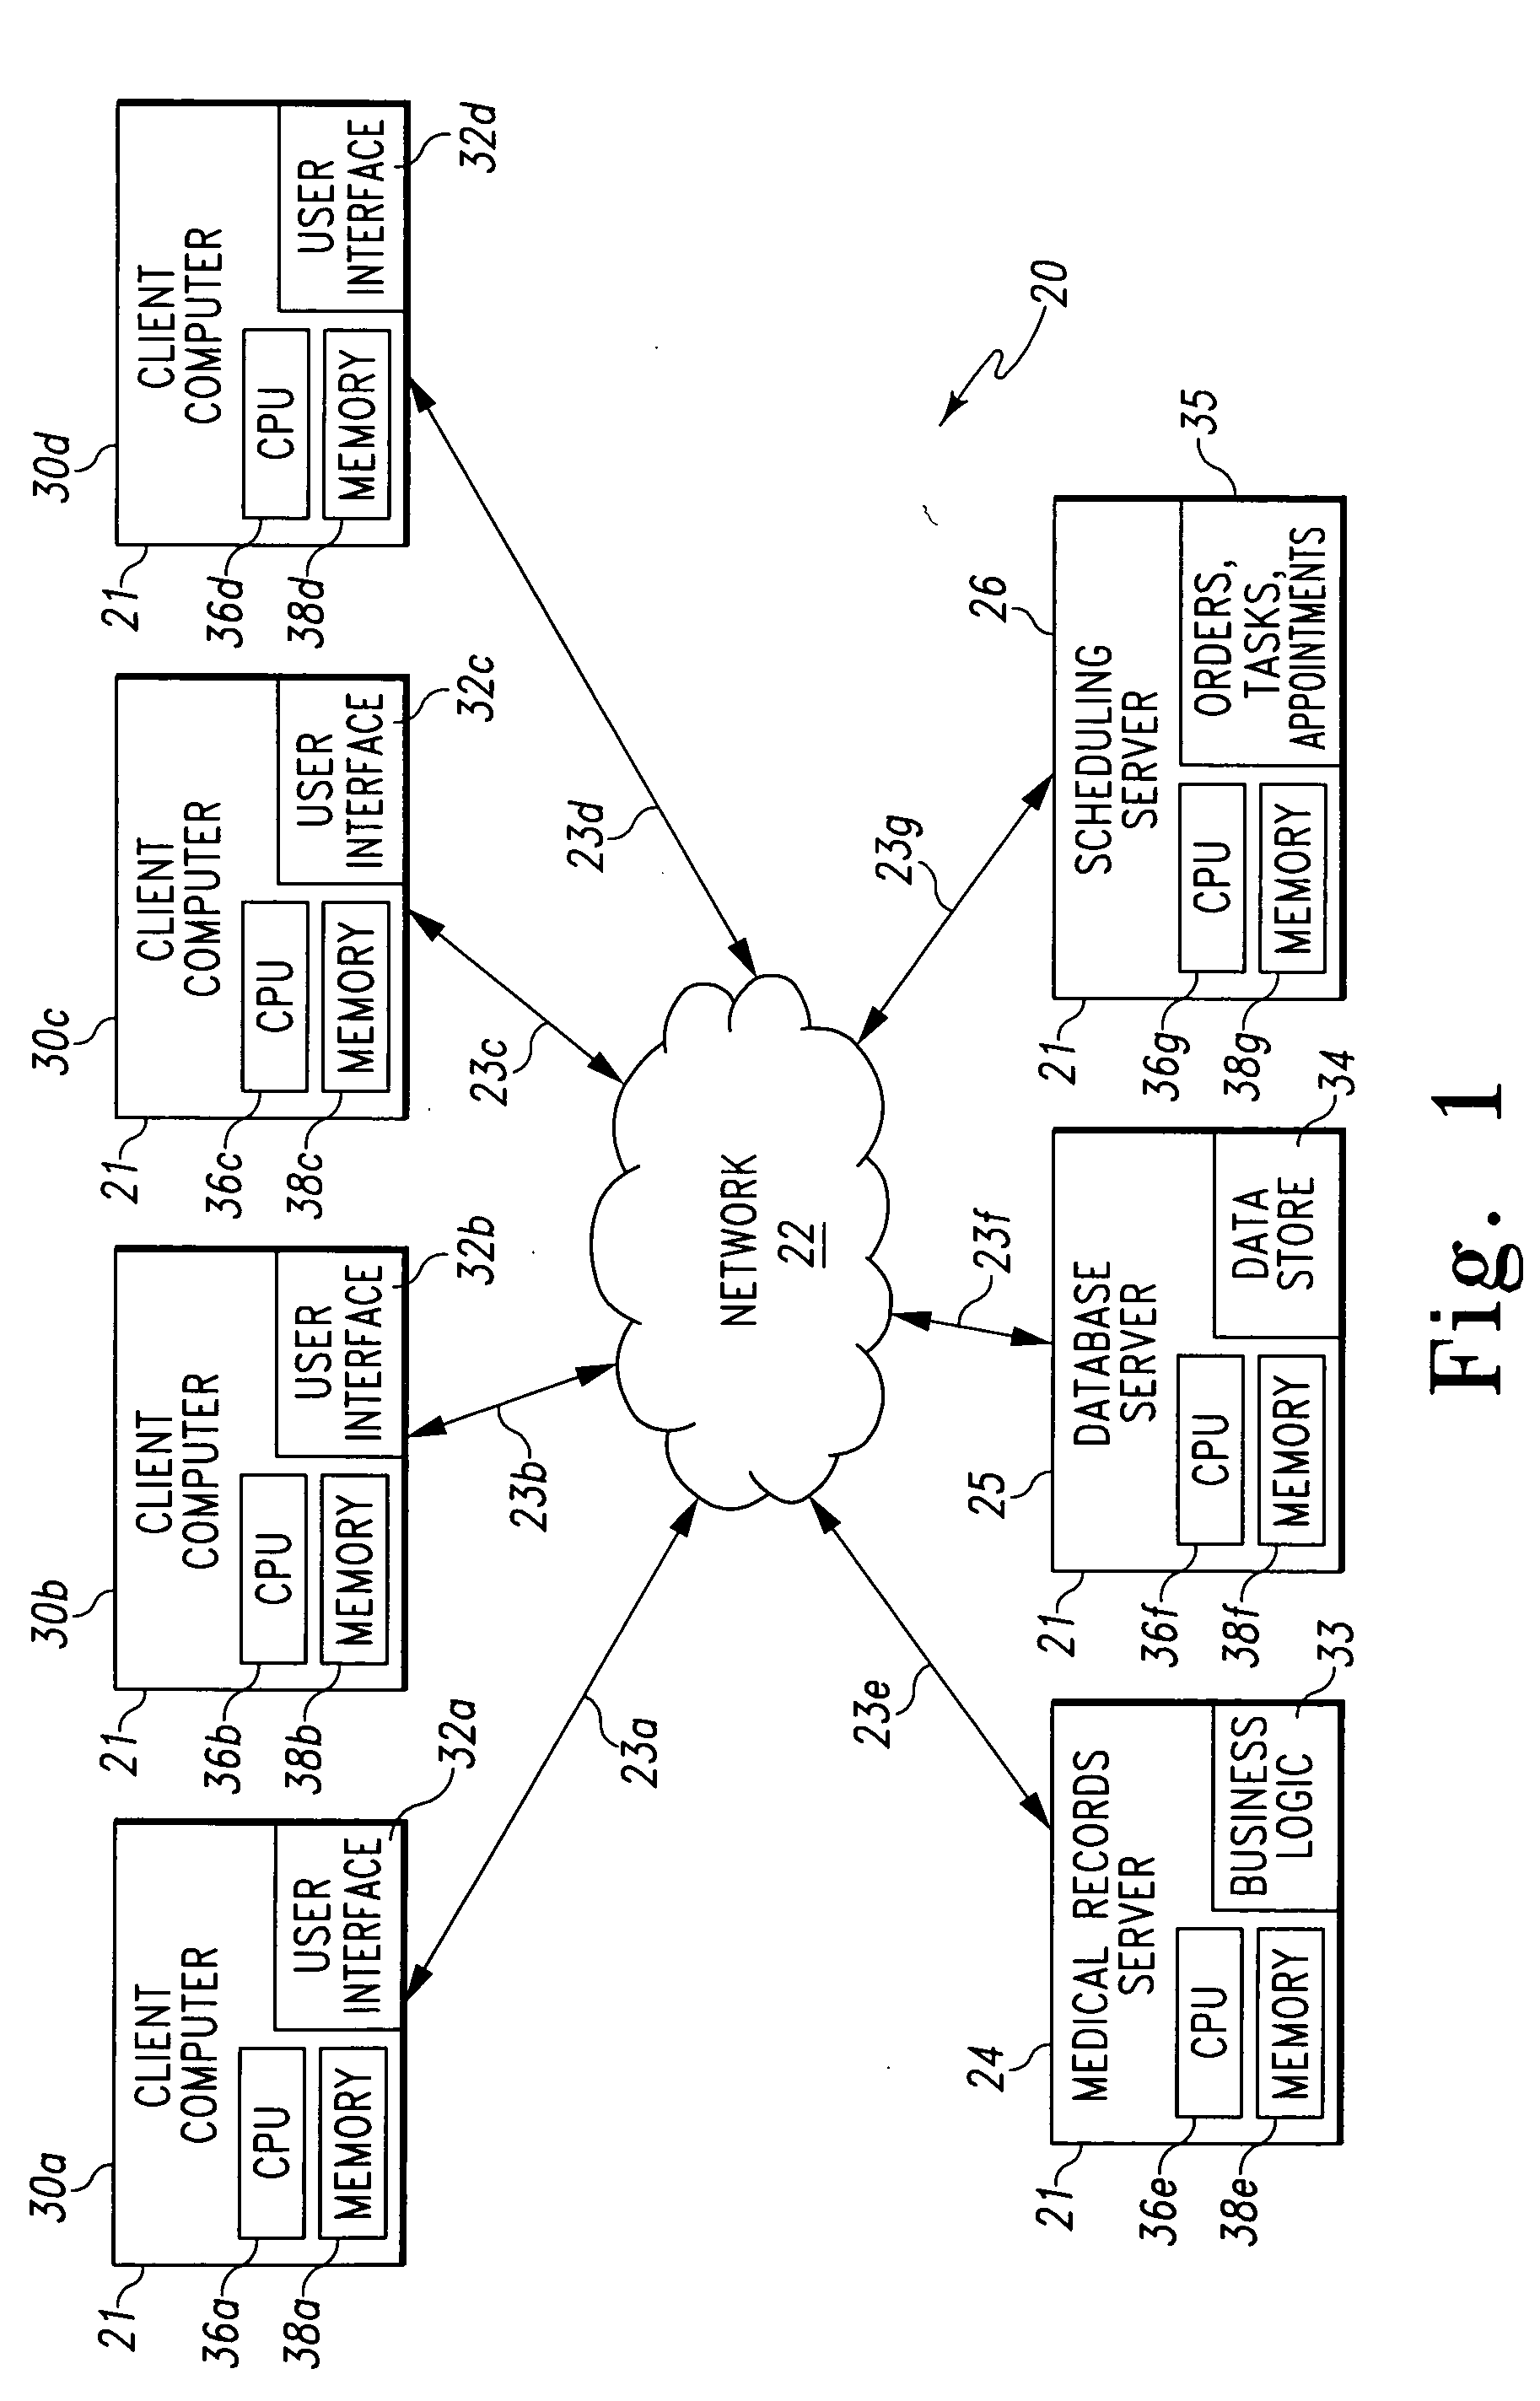 System and method for generating documentation from flow chart navigation